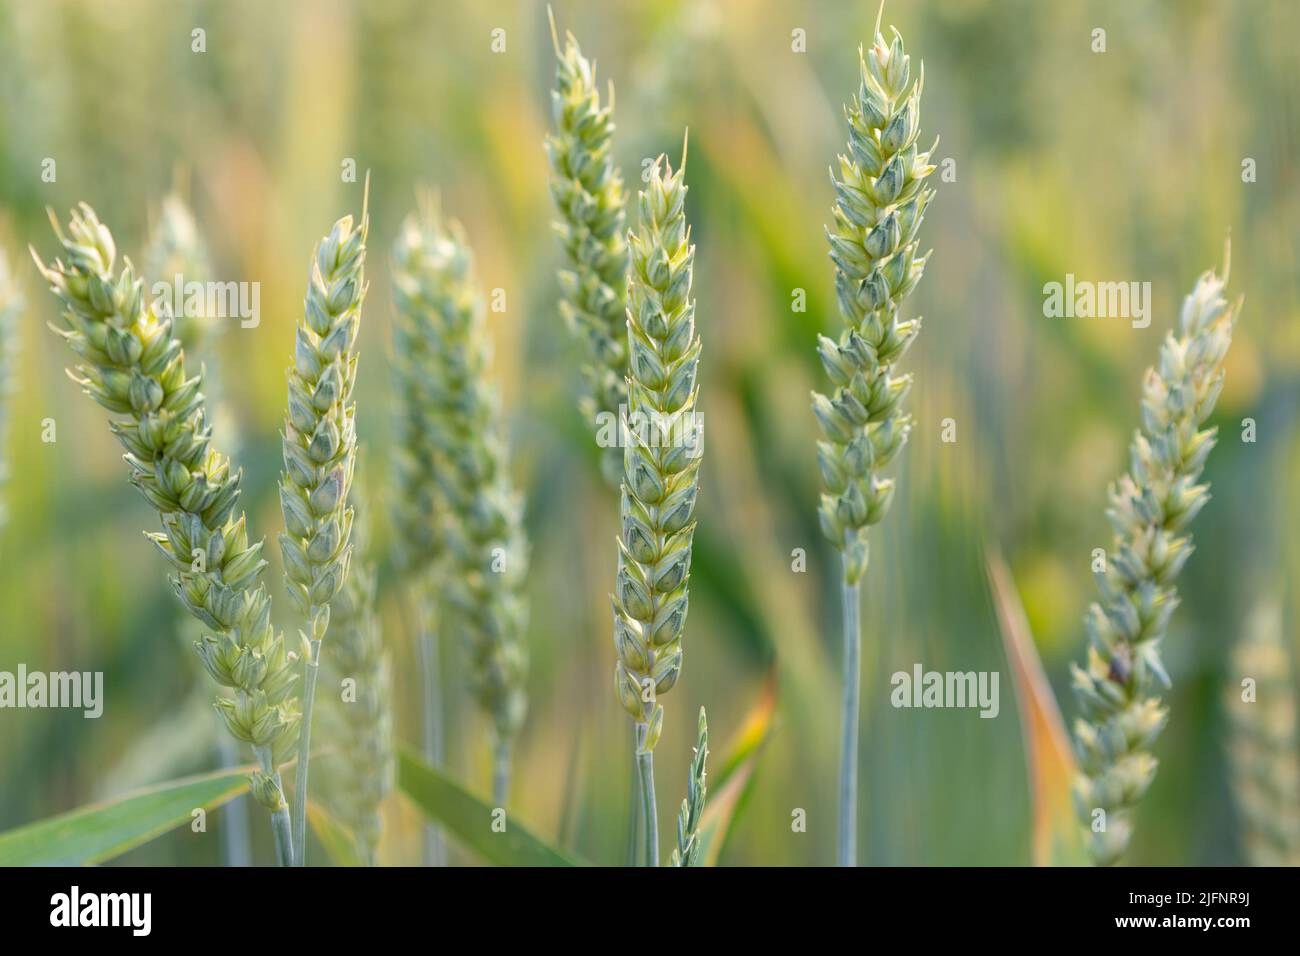 Field of ripen wheat with several ears of corn on foreground Stock Photo